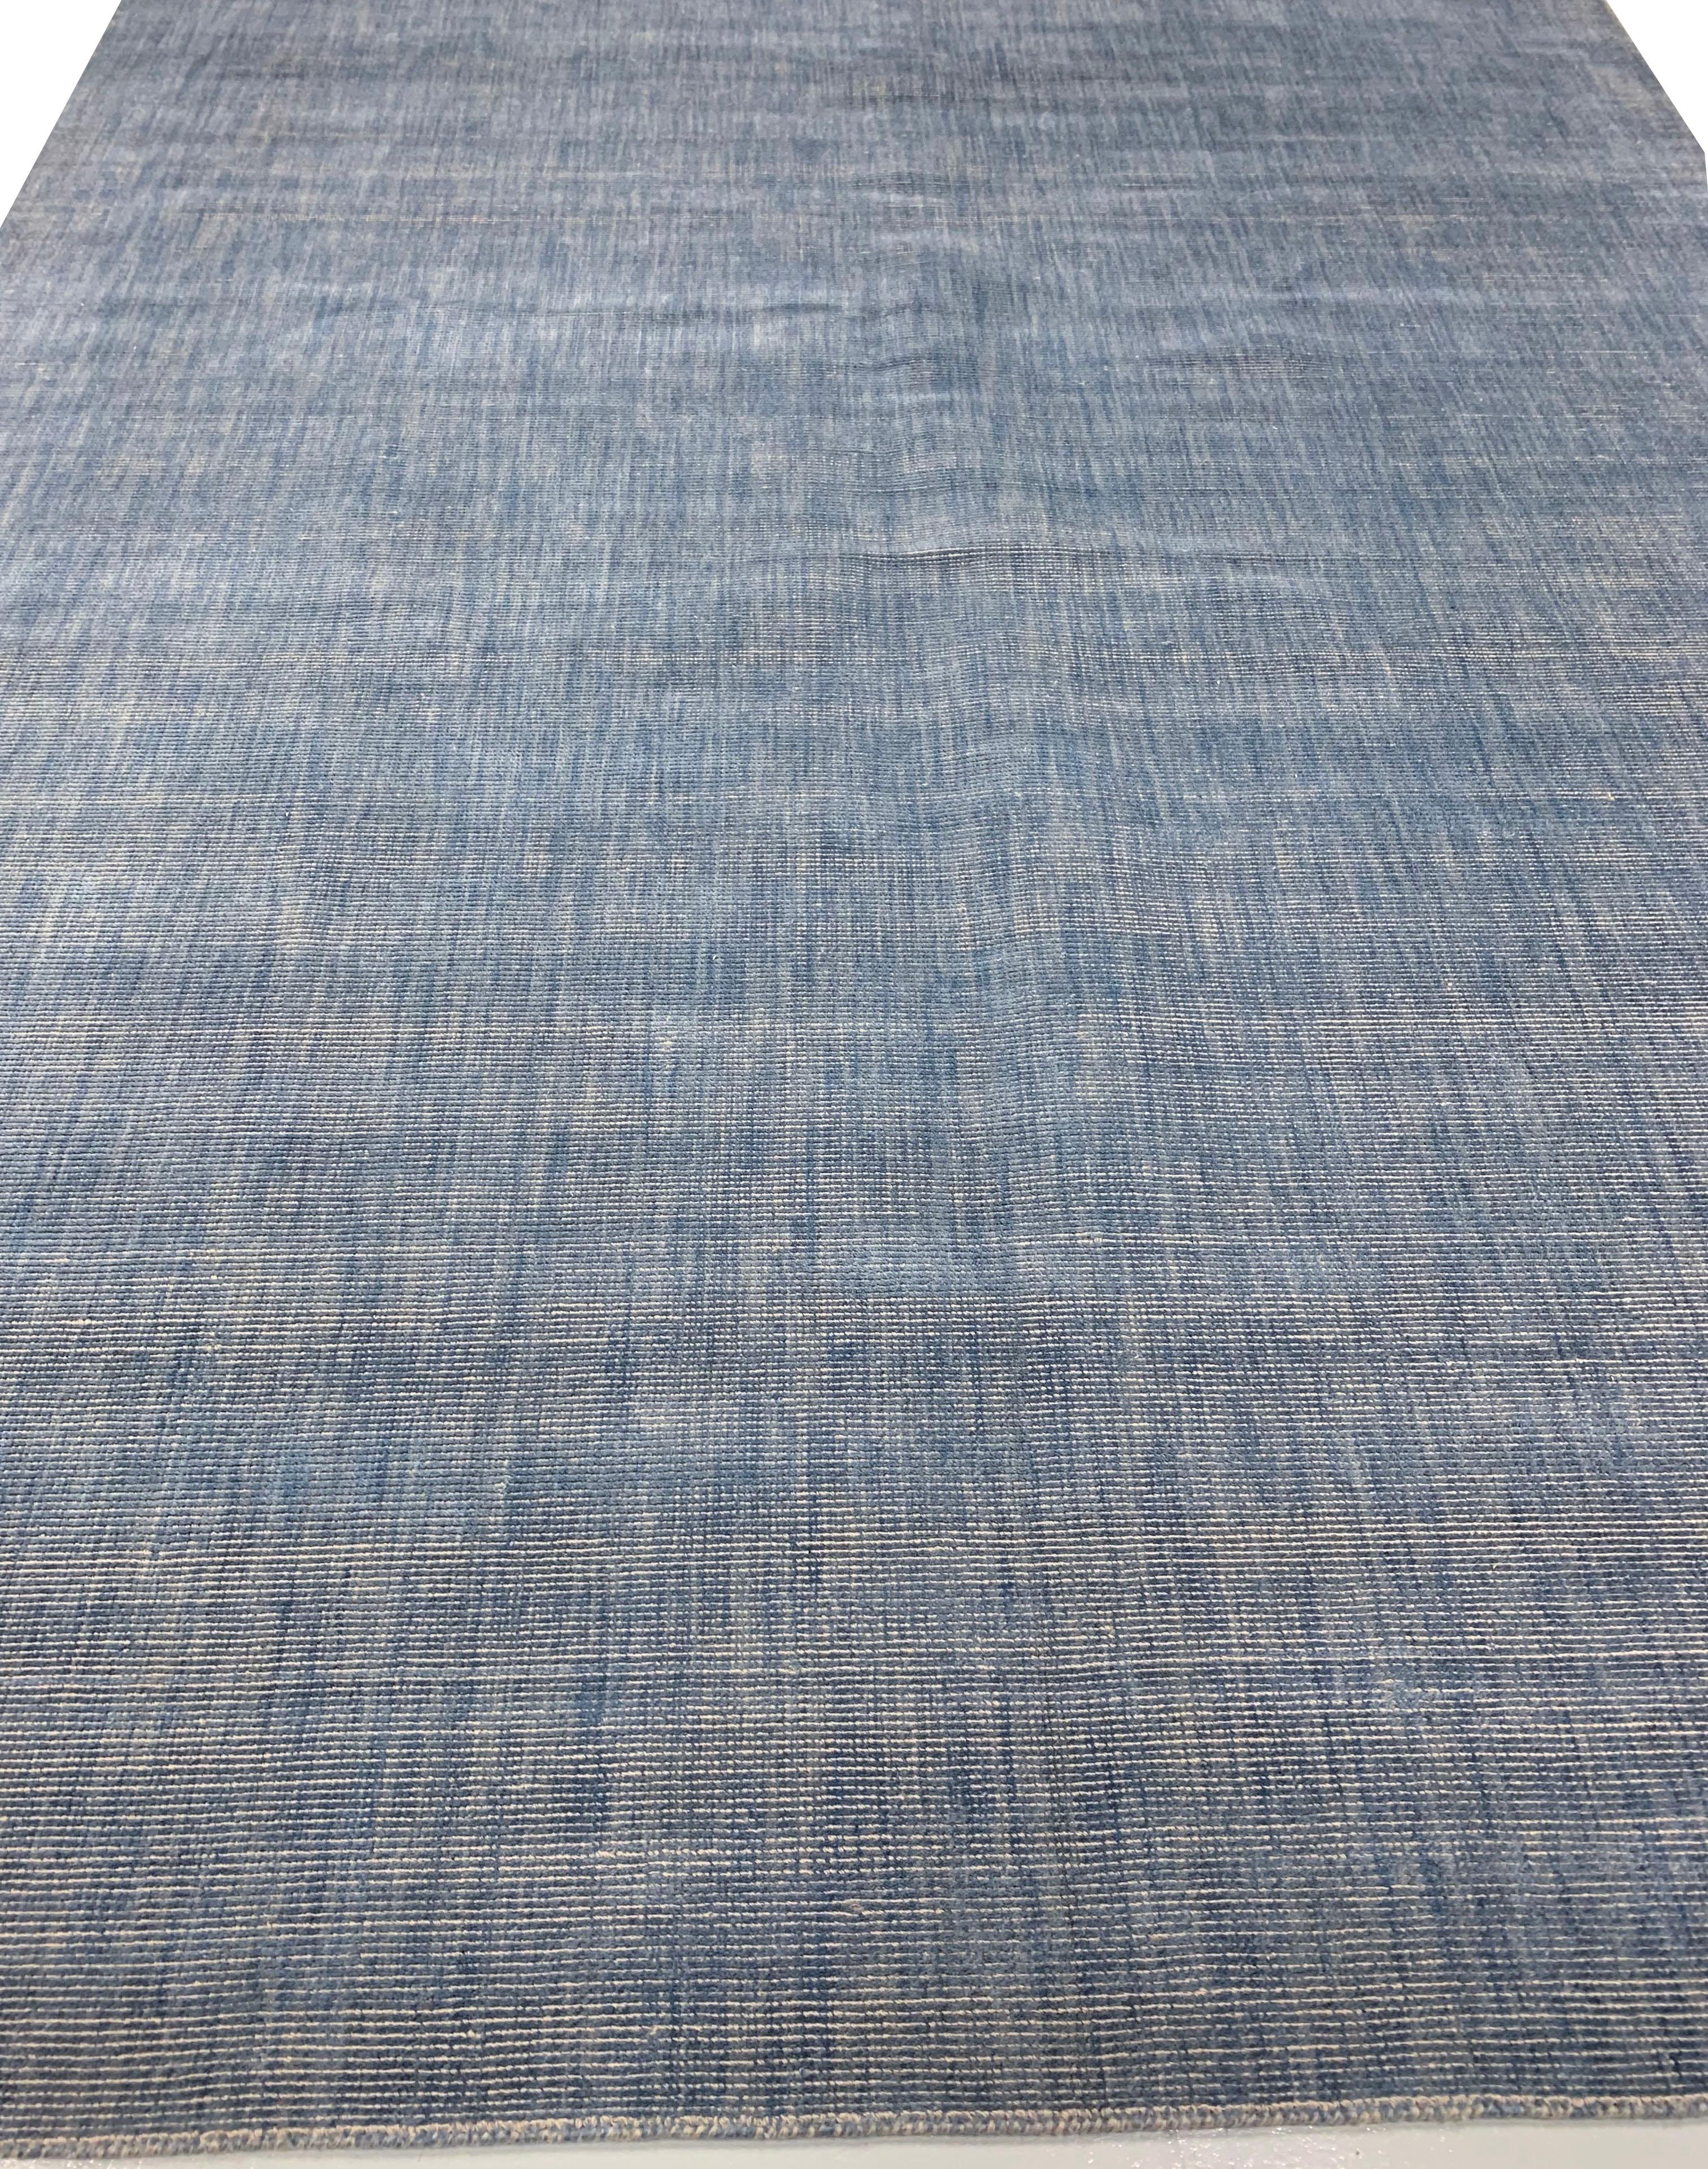 Simplicity blue contemporary rug 8' x 10'. We call this our “Simplicity” Line, but a closer look reveals that it is not so simple. Yes, we have eliminated borders, yes the pattern is infinite, yes it is purely geometric. But no, it is not a simple